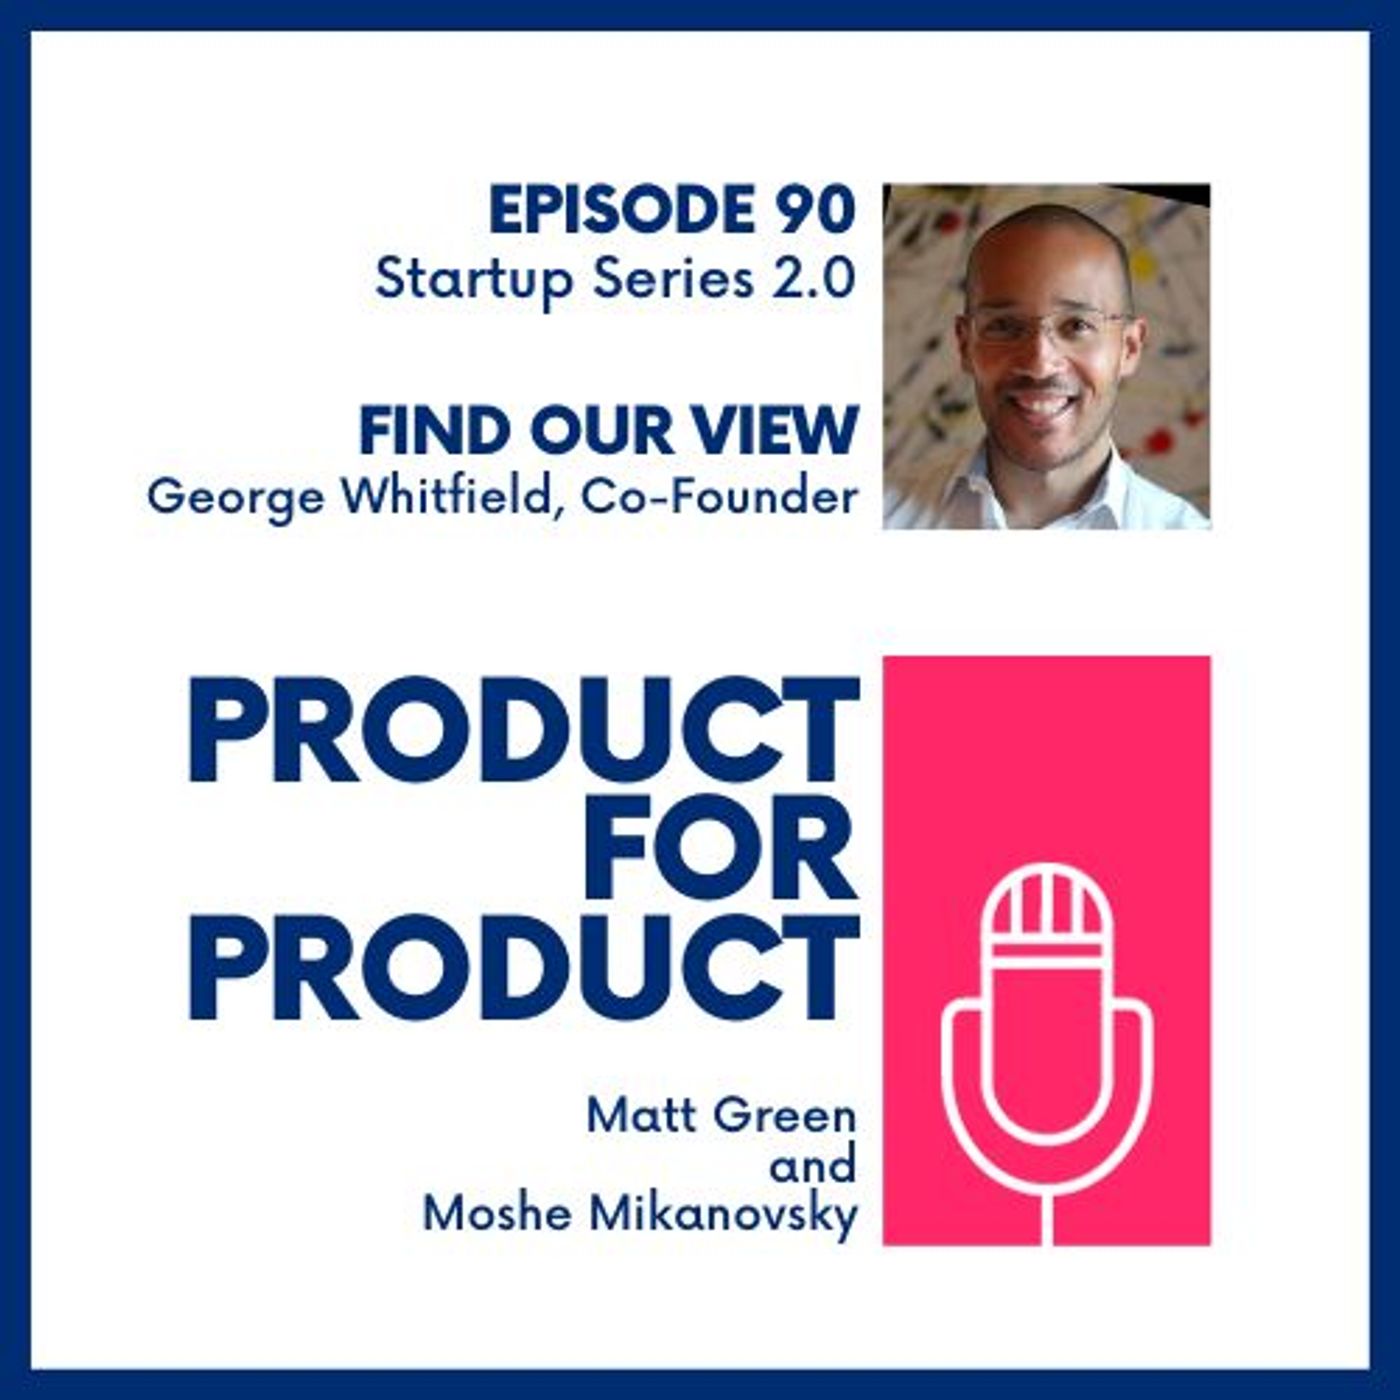 EP 90 - Startups: FindOurView with George Whitfield